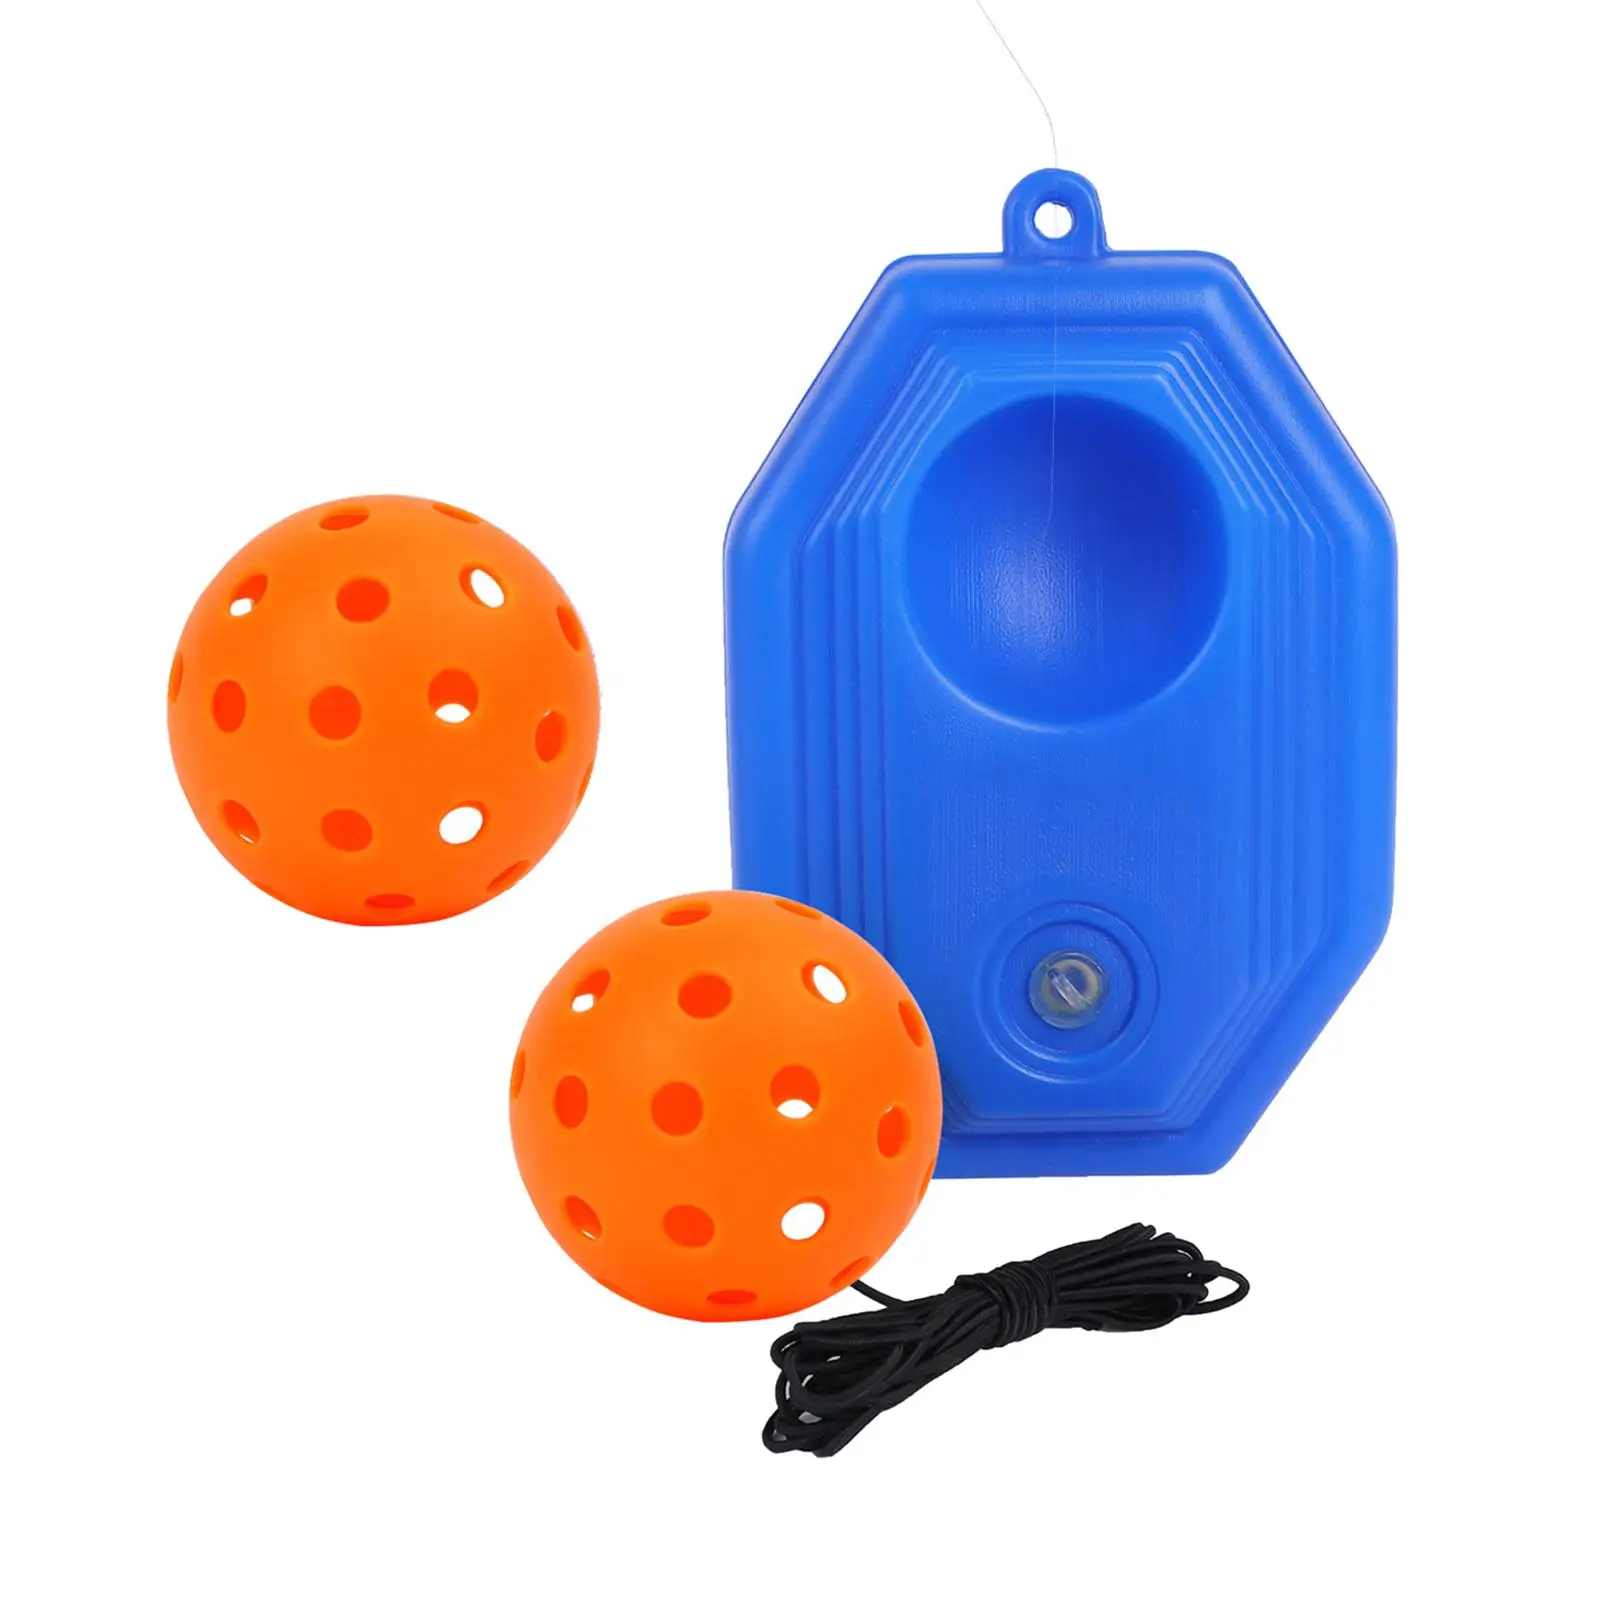 Pickleball Trainer Pickleball Ball with String Pickleball Training Tool for Solo Tennis Training Adult Kids Indoor Outdoor